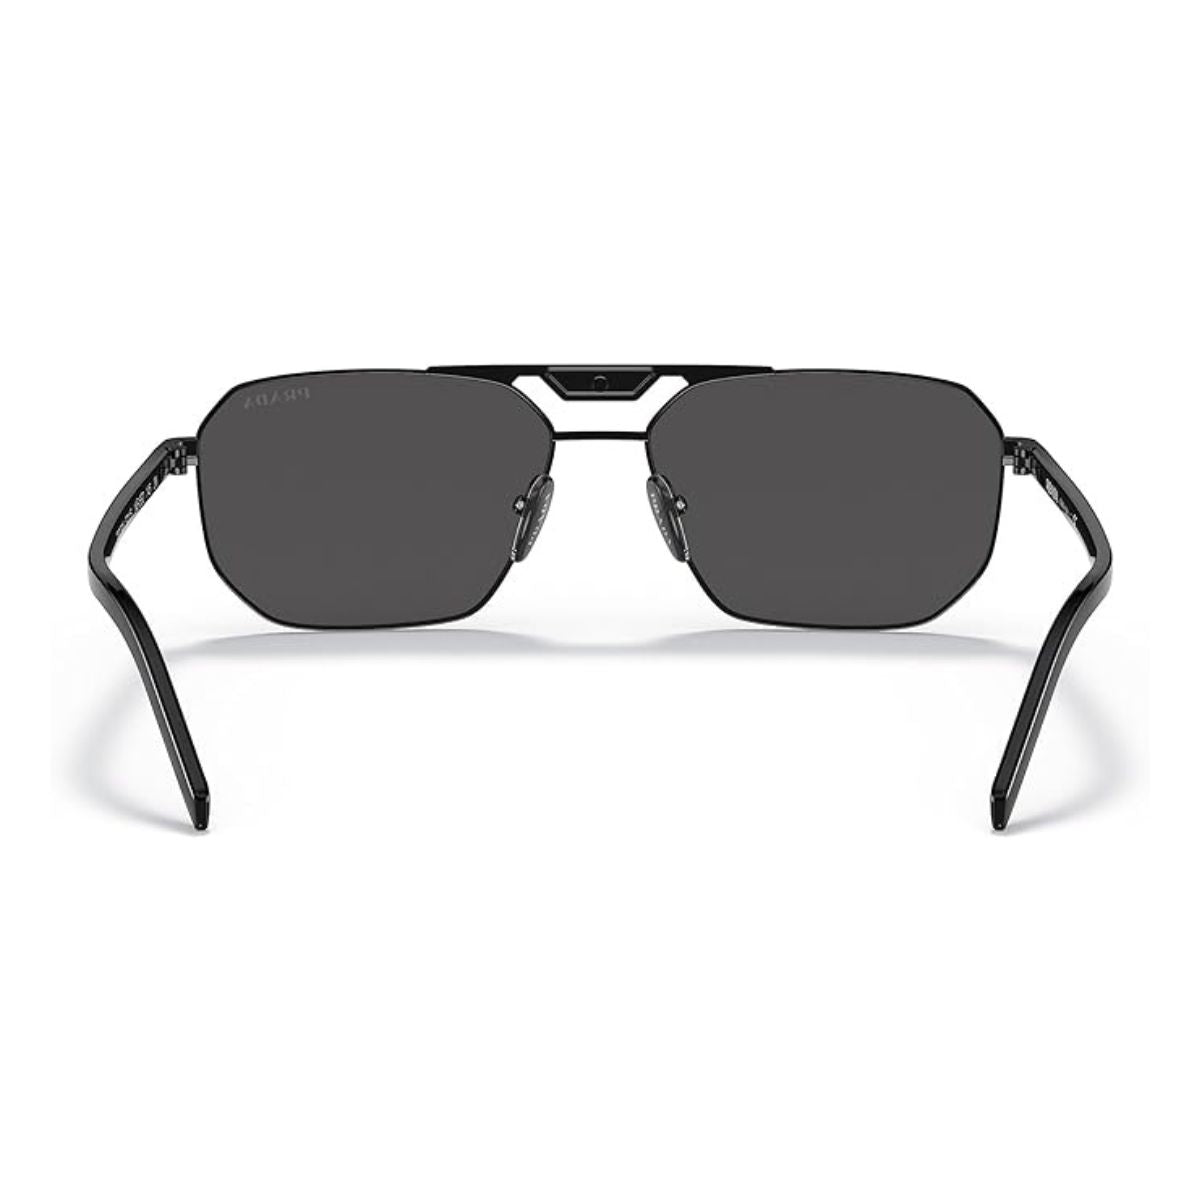 "Experience Superior UV Protection with Prada SPR58Y 1AB-5S0  Sunglass For Men's At Optorium"